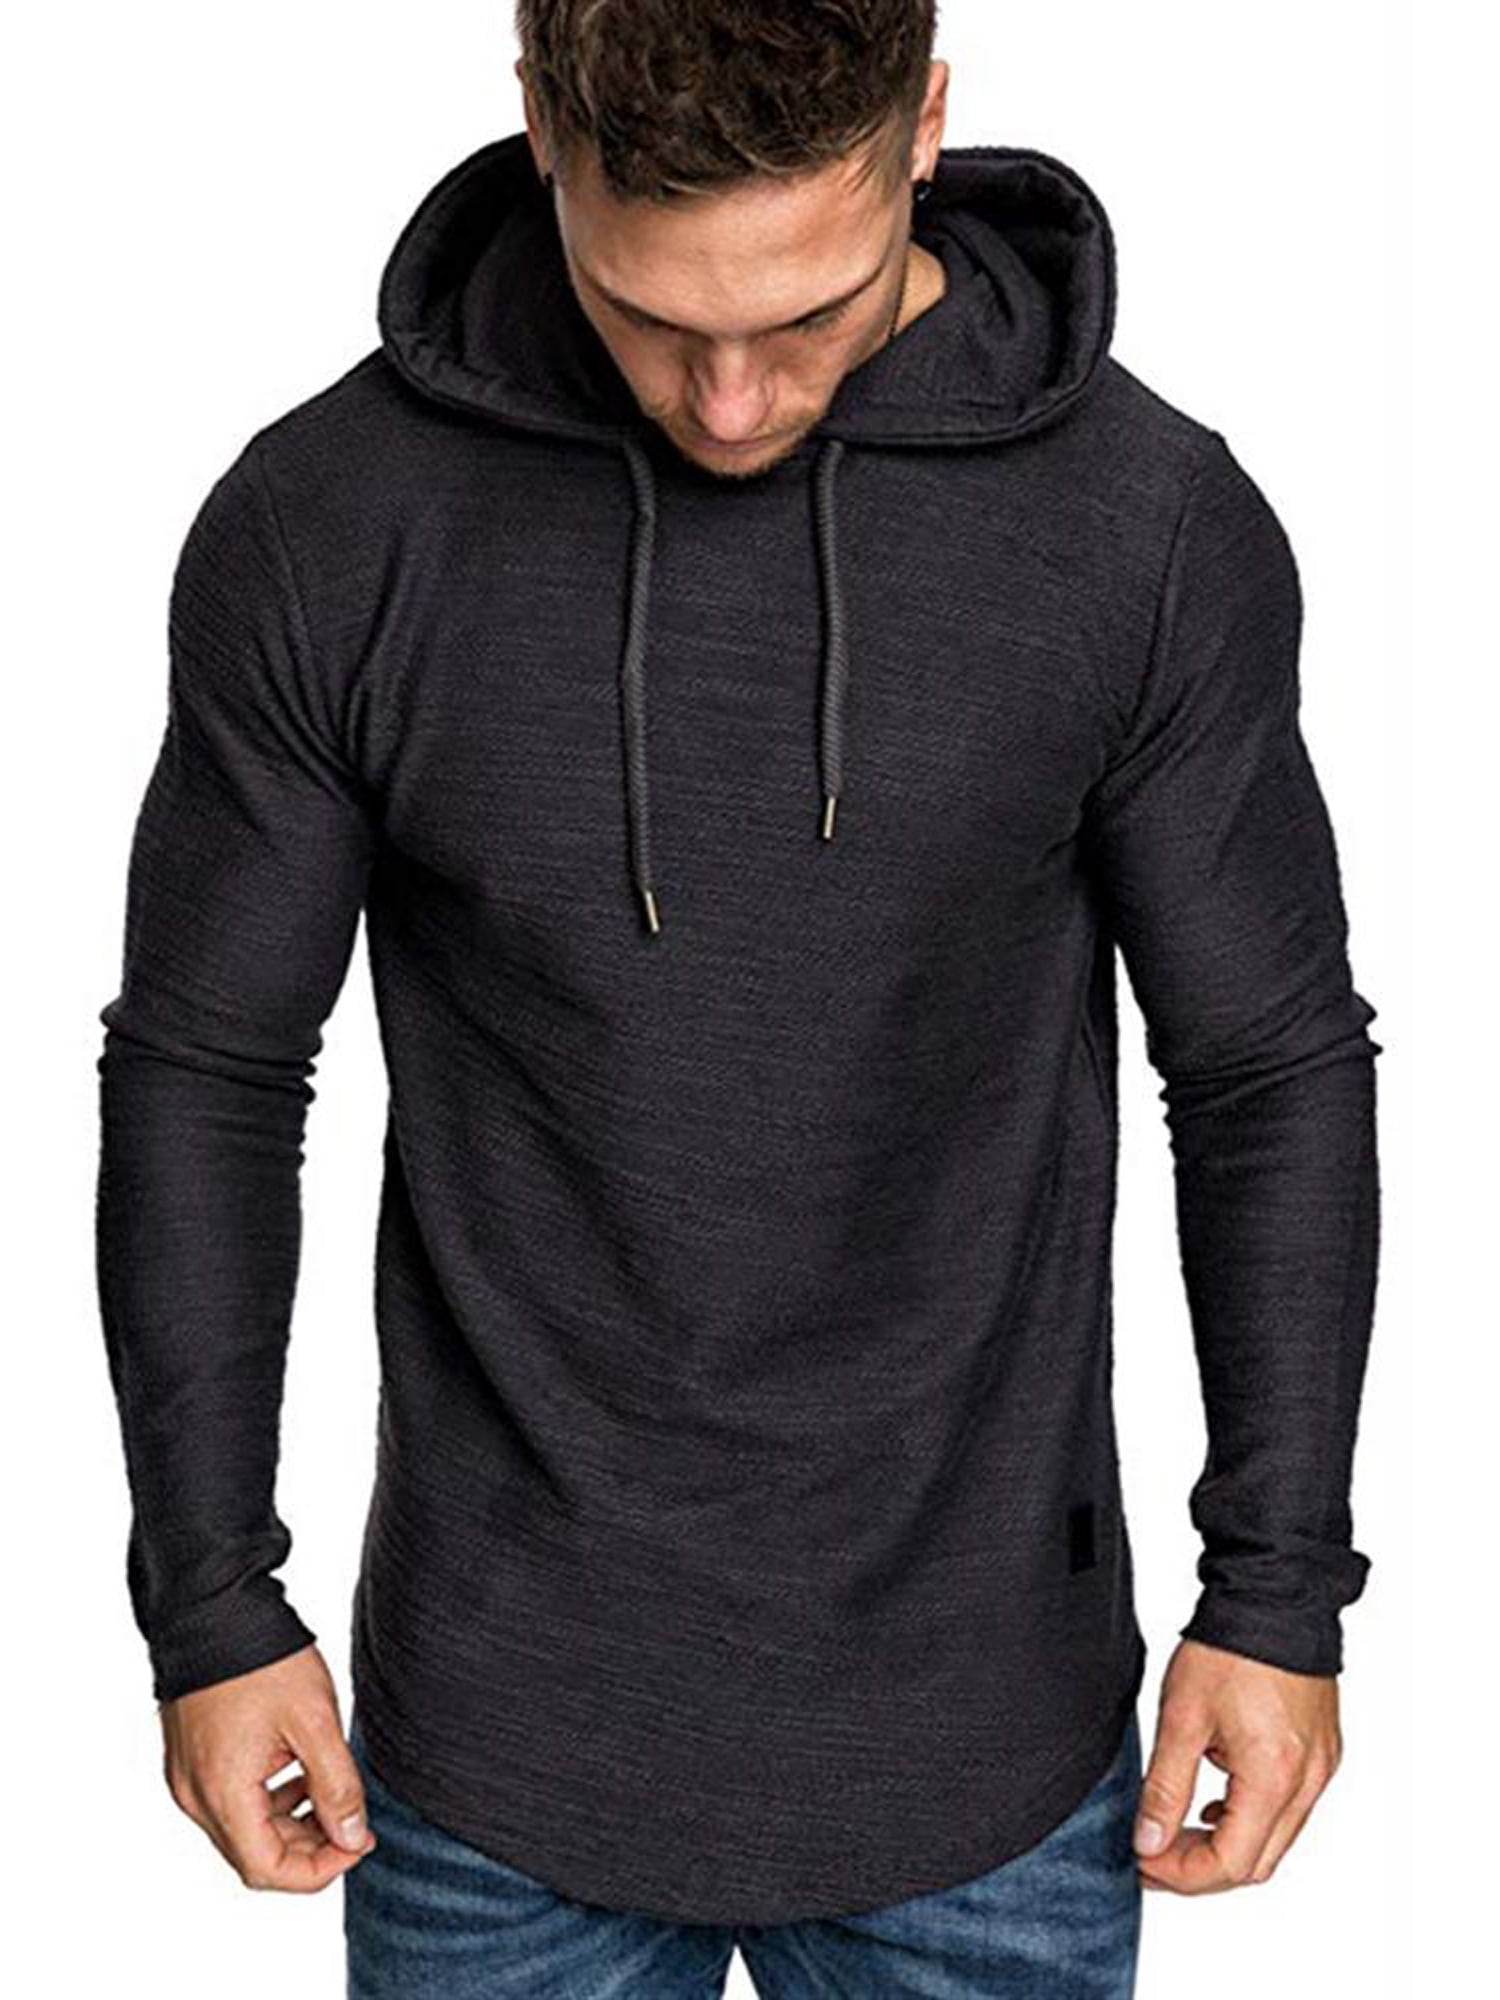 lexiart Mens Fashion Athletic Hoodies Pullover Solid Color Pleated Long Sleeved Sweatshirt 